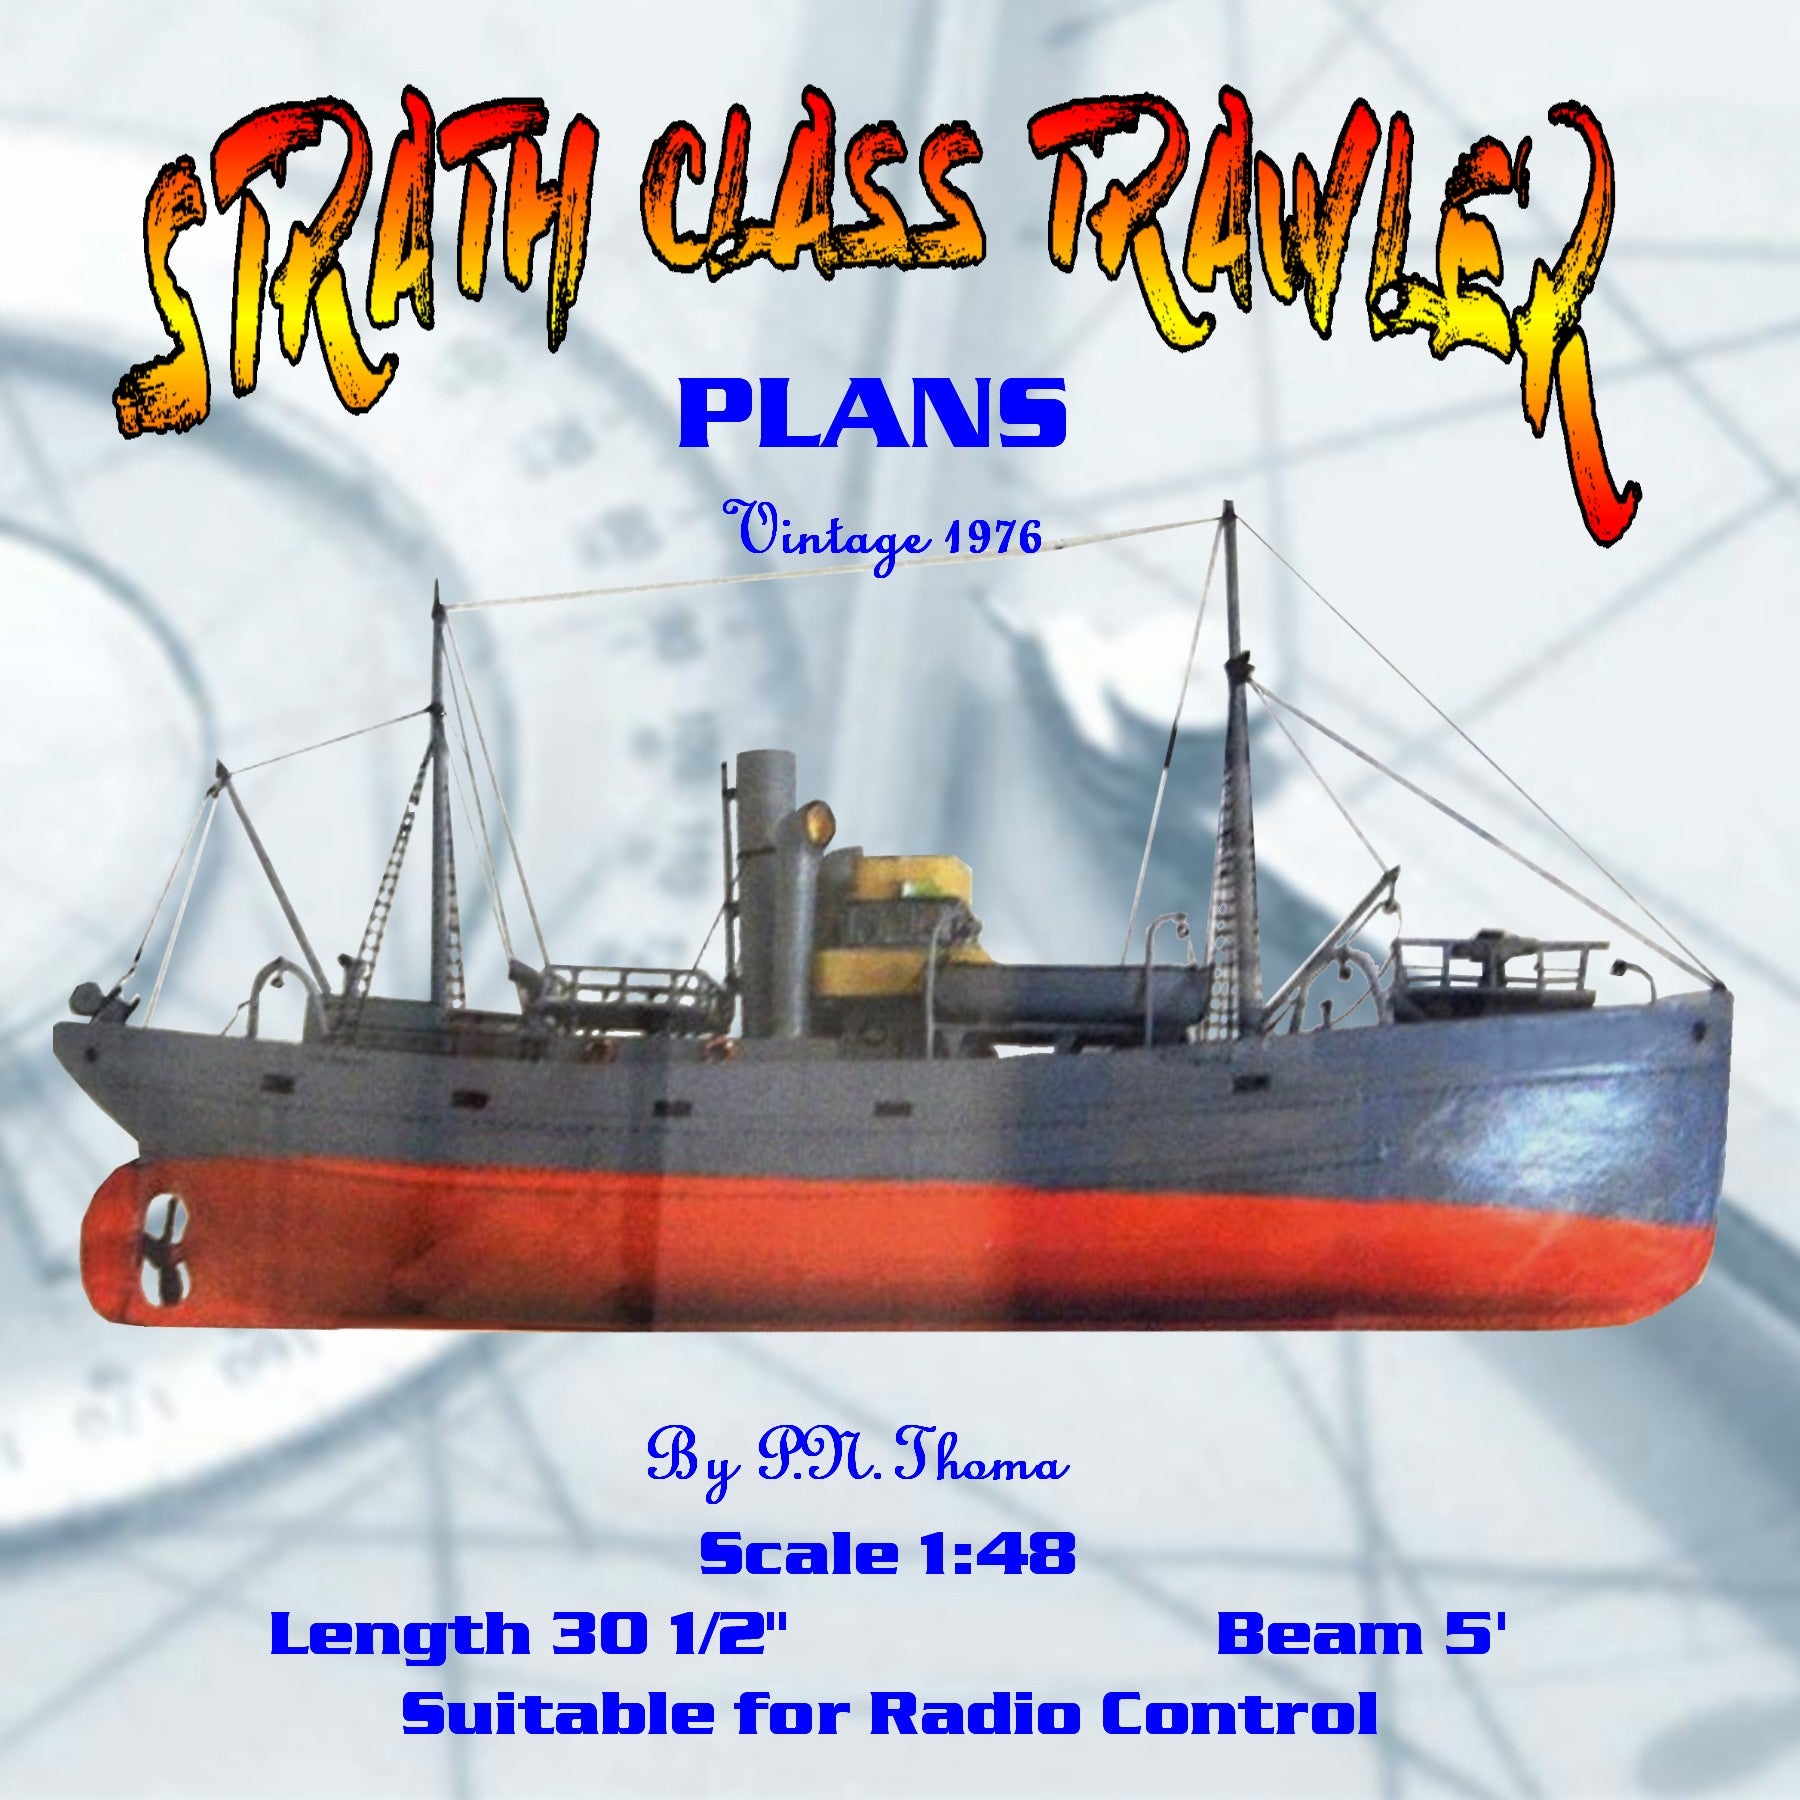 full size printed plan scale 1:48 suitable for radio control "strath class trawler"